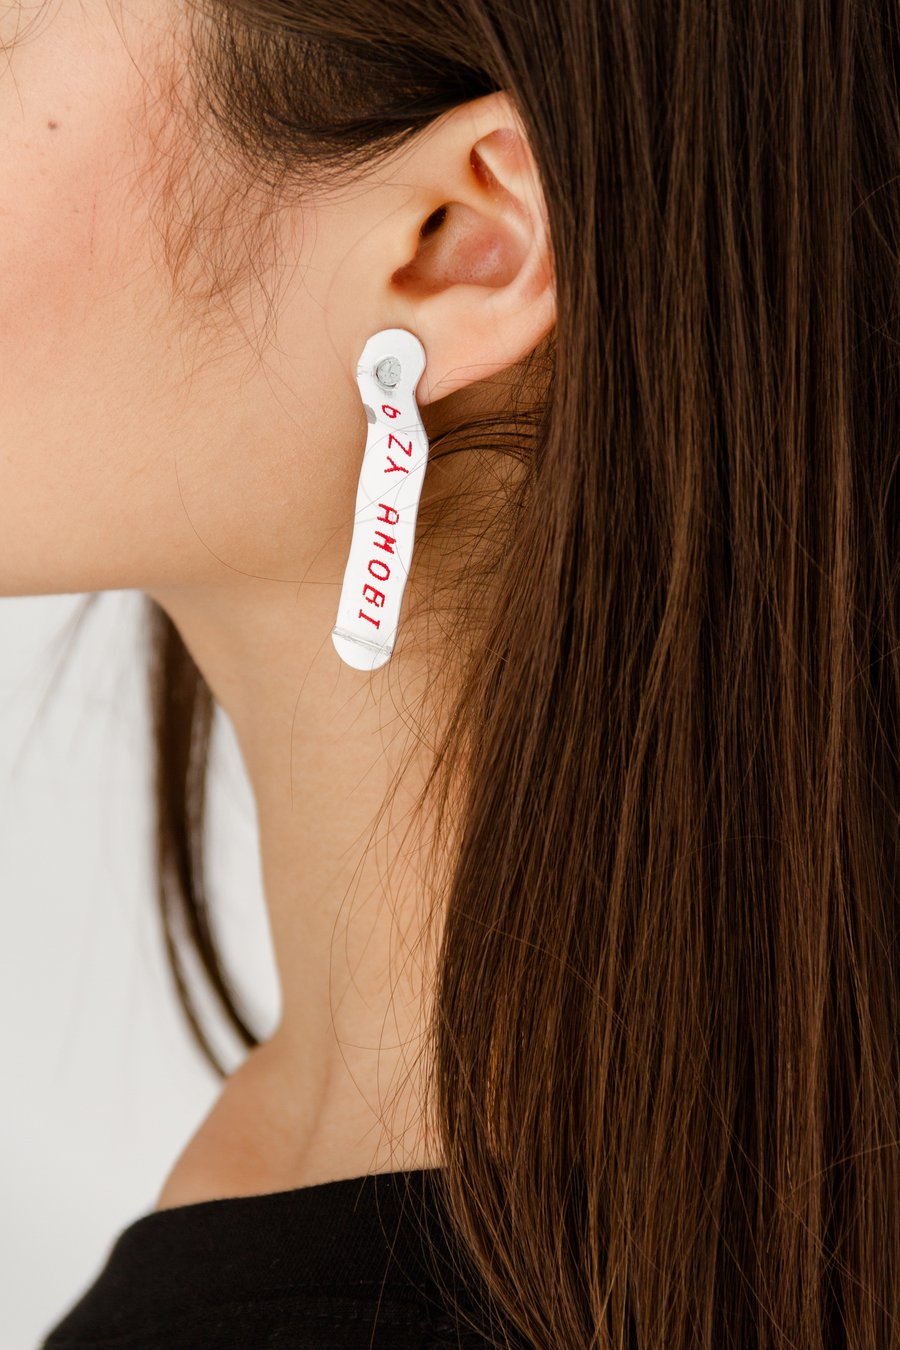 Image of Eroica Human Ear Tag